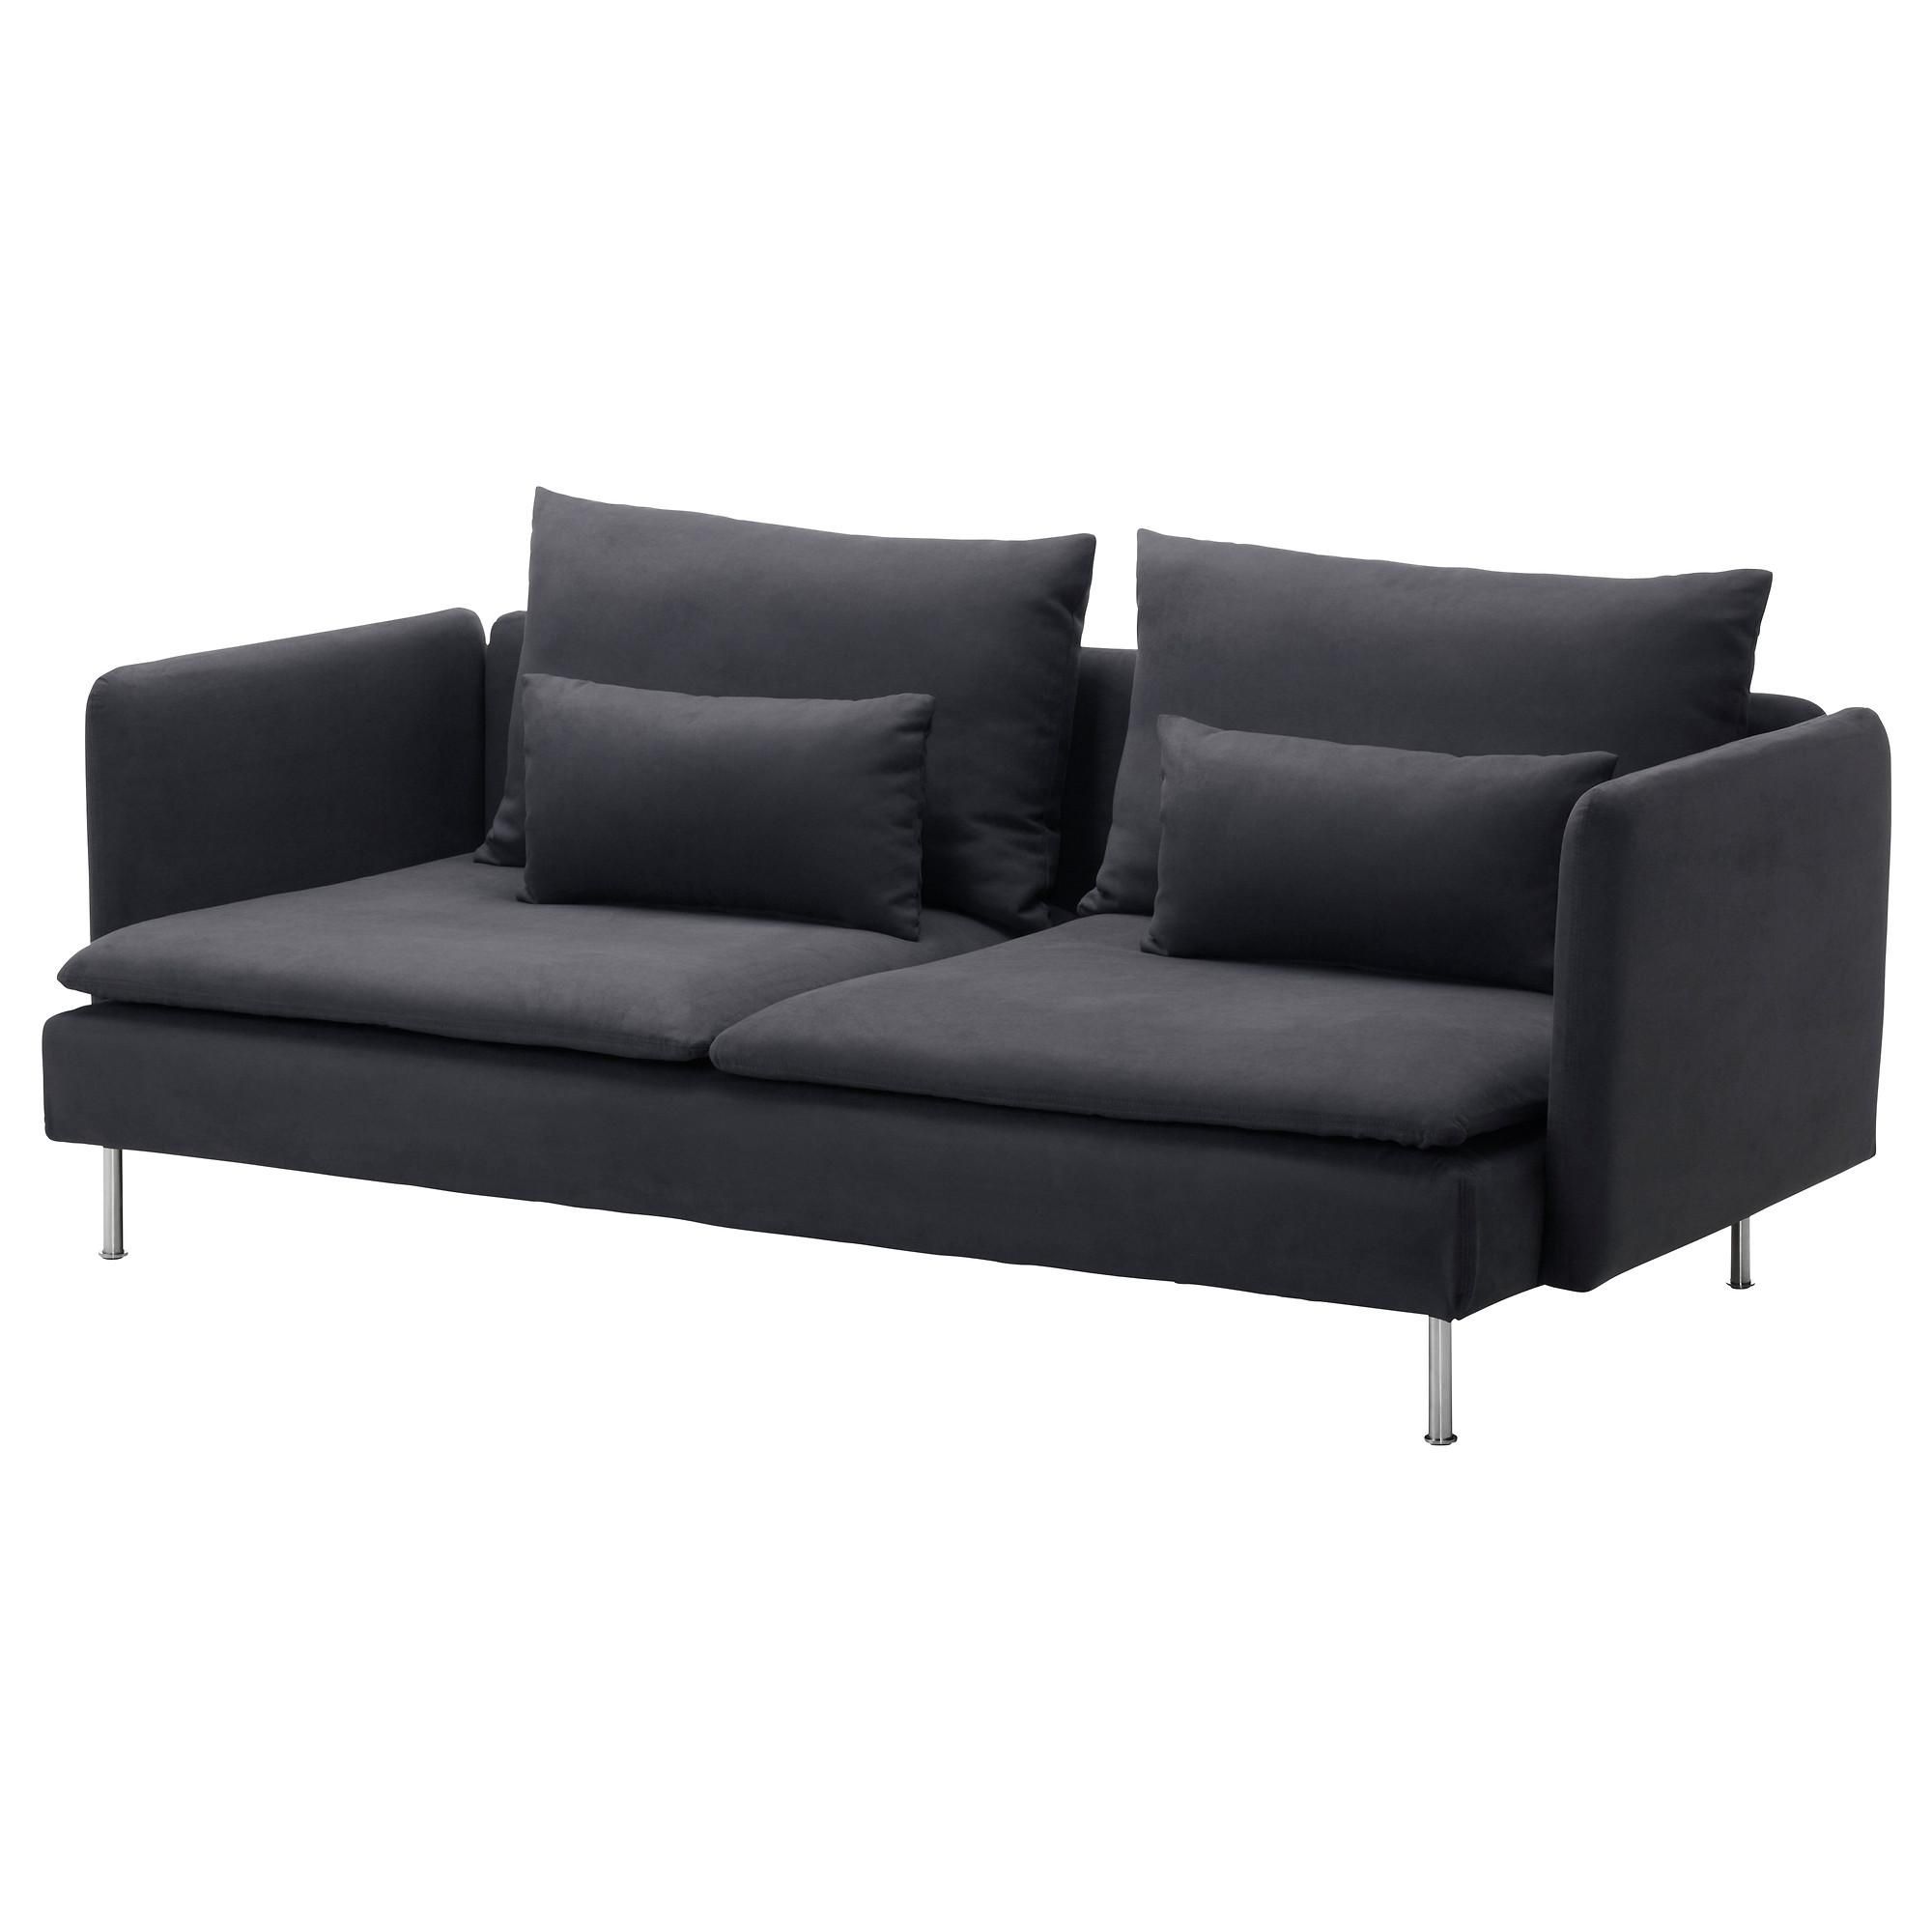 Sectional Sofas & Couches – Ikea For Manstad Sofa Bed (View 13 of 20)